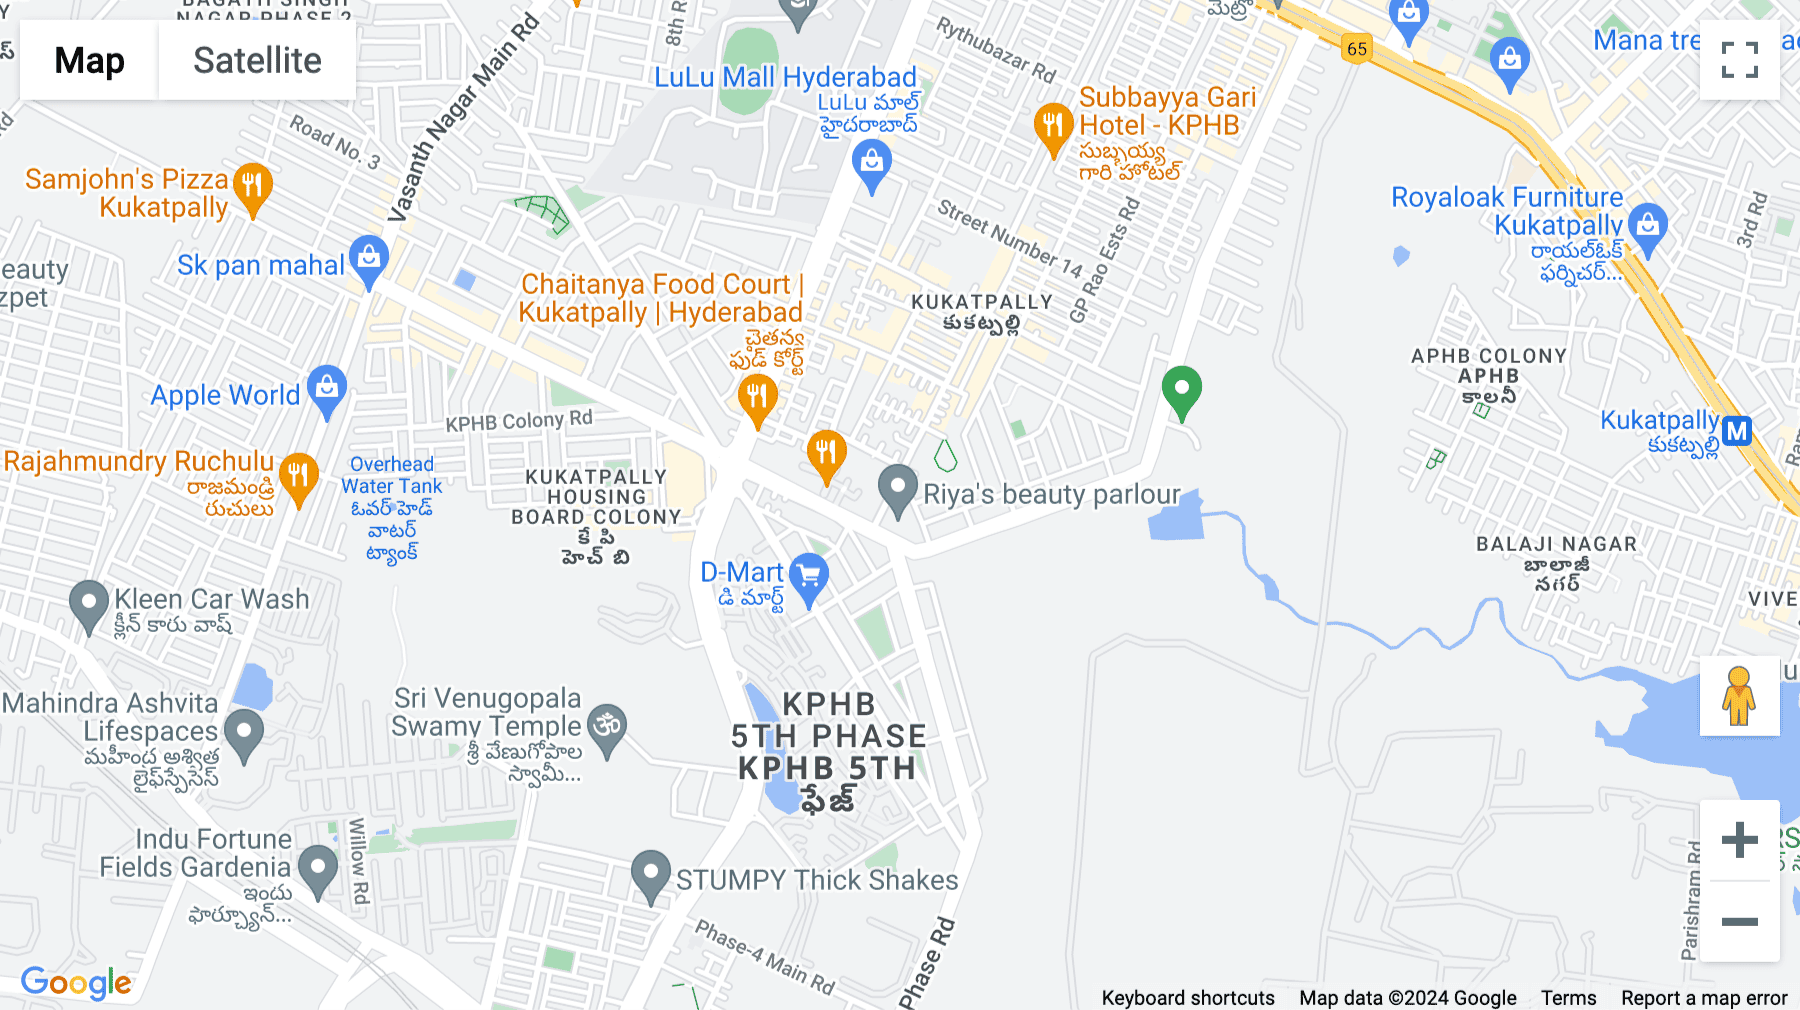 Click for interative map of Kukatpally, KPHB Colony, Reliance Brand Factory, Hyderabad